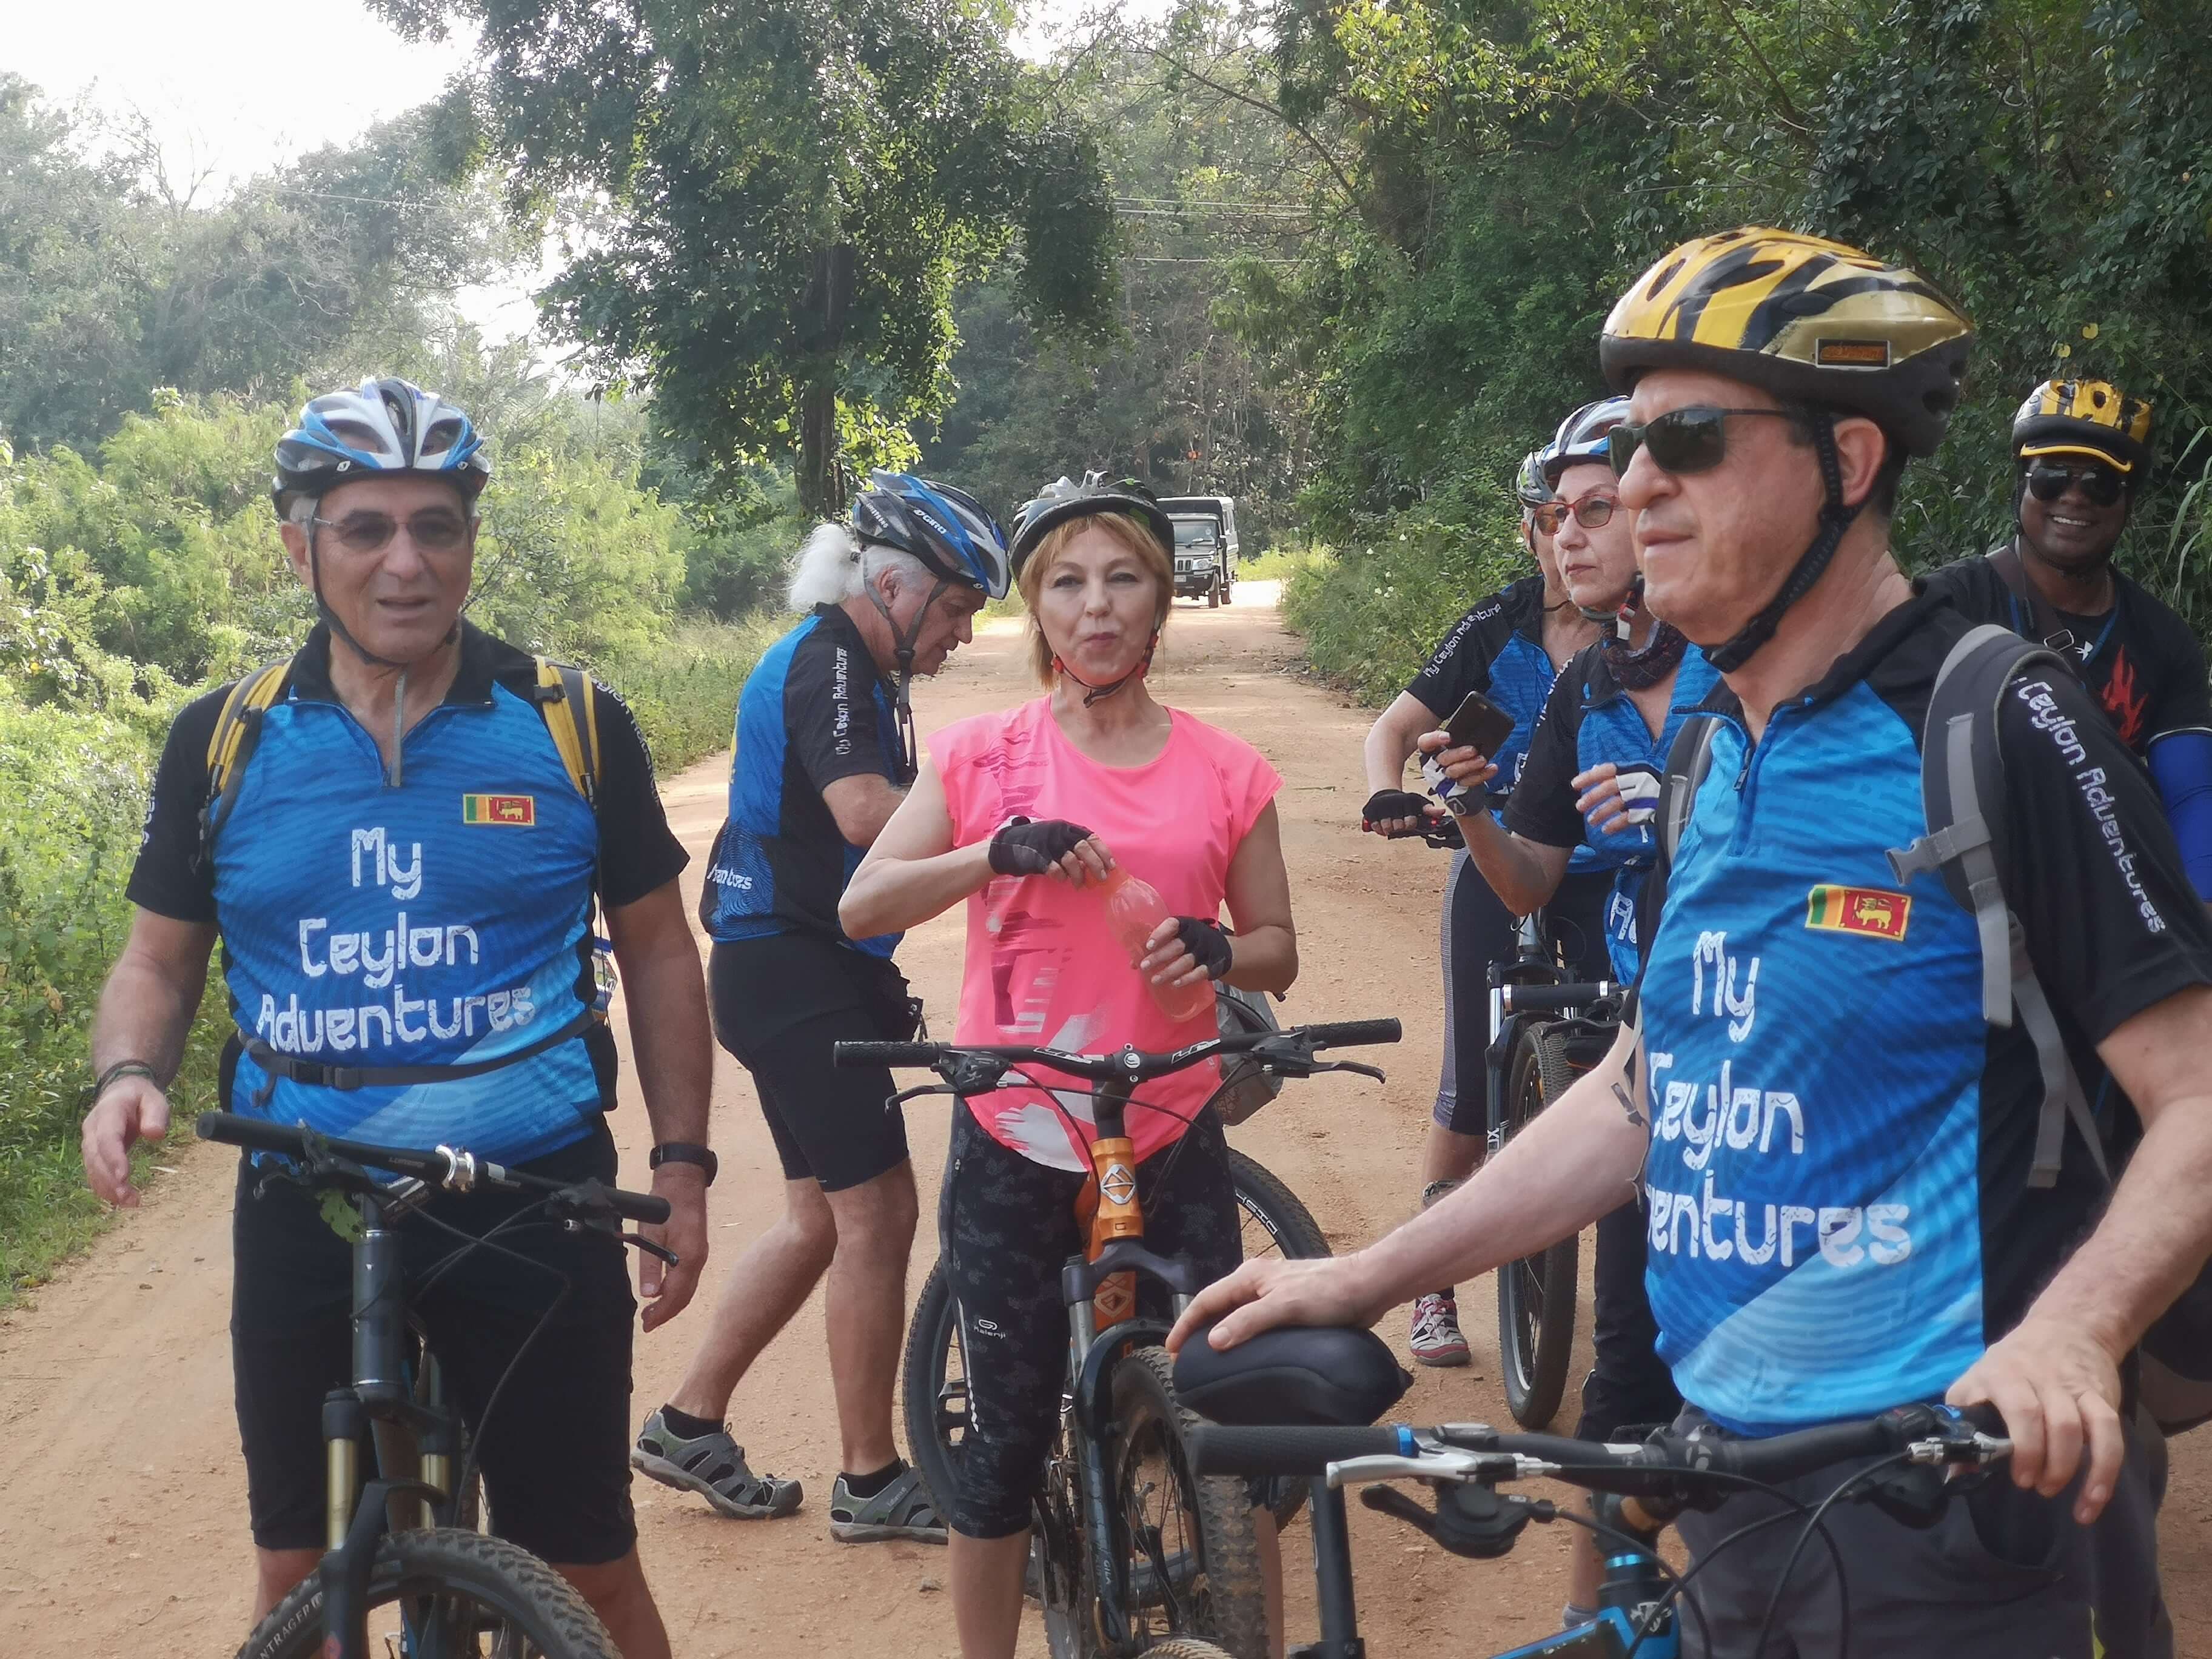 The cyclists get a break while the cycling tour in Mirissa Sri Lanka